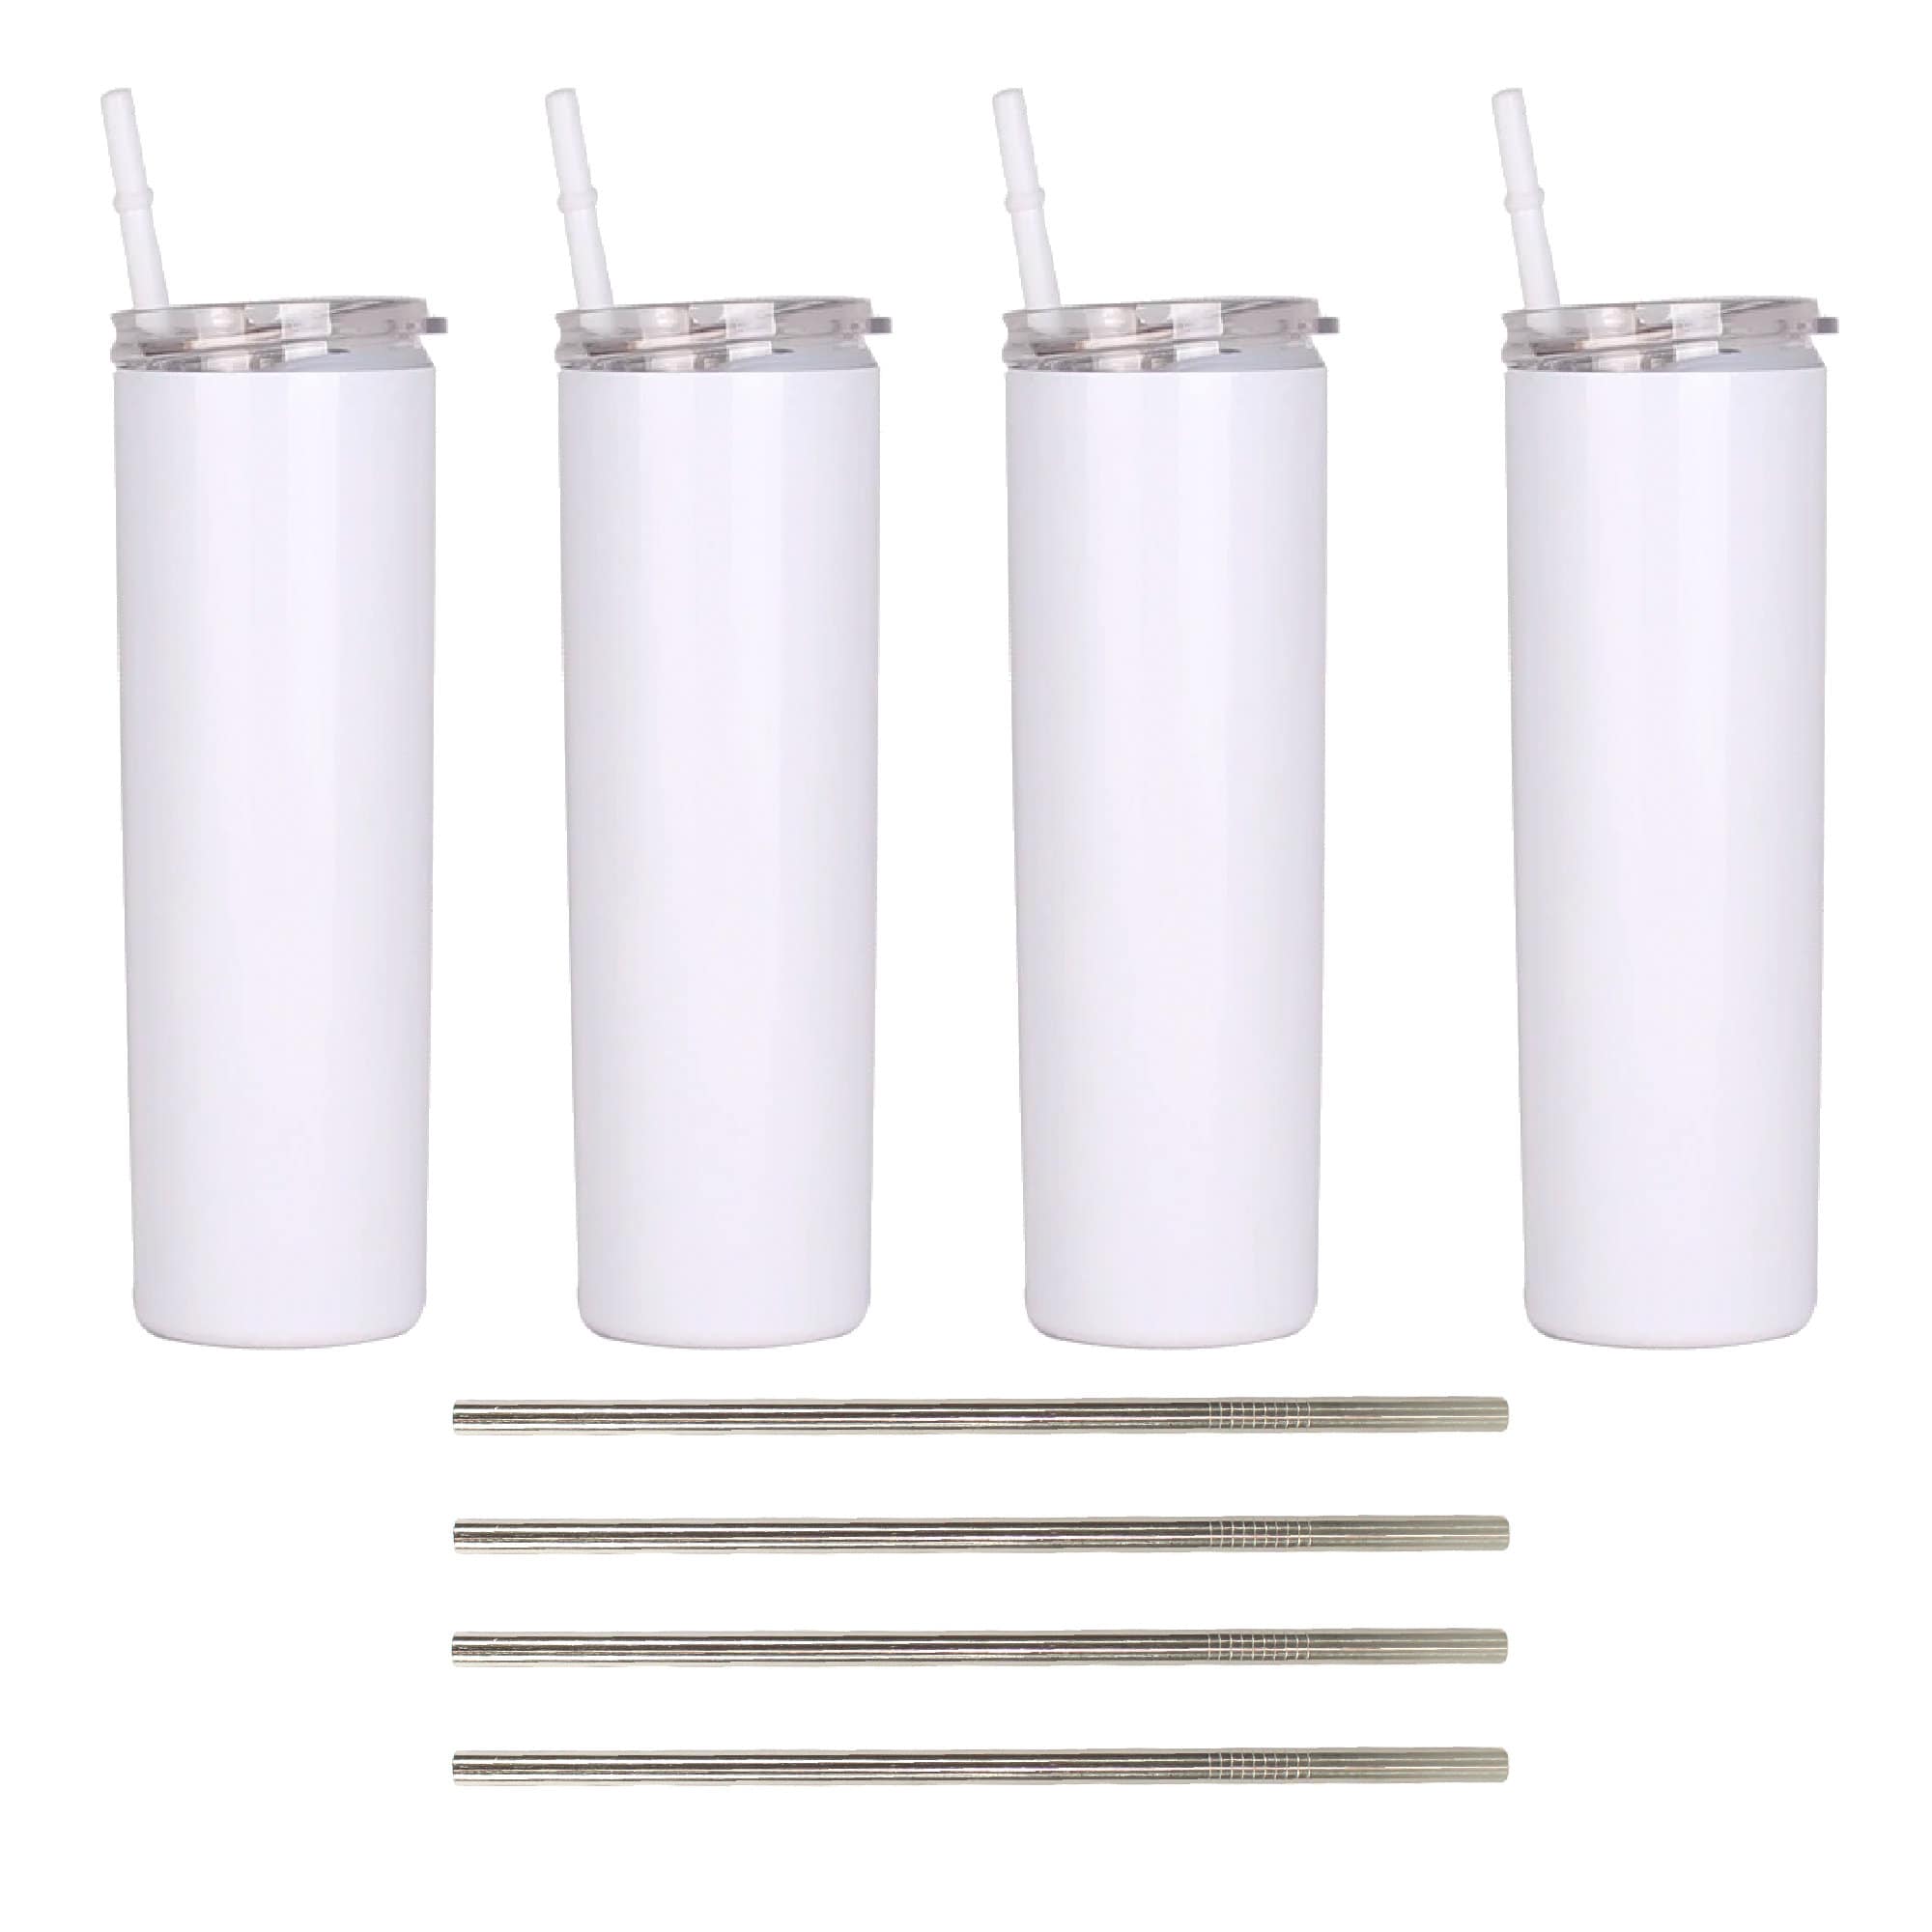 Subconscious Blanks 20oz Sublimation Tumblers, Blank 4-Pack, Straight Skinny Drink Cups with 4 Reusable Plastic Straws and 4 Lids, Supports DIY Heat